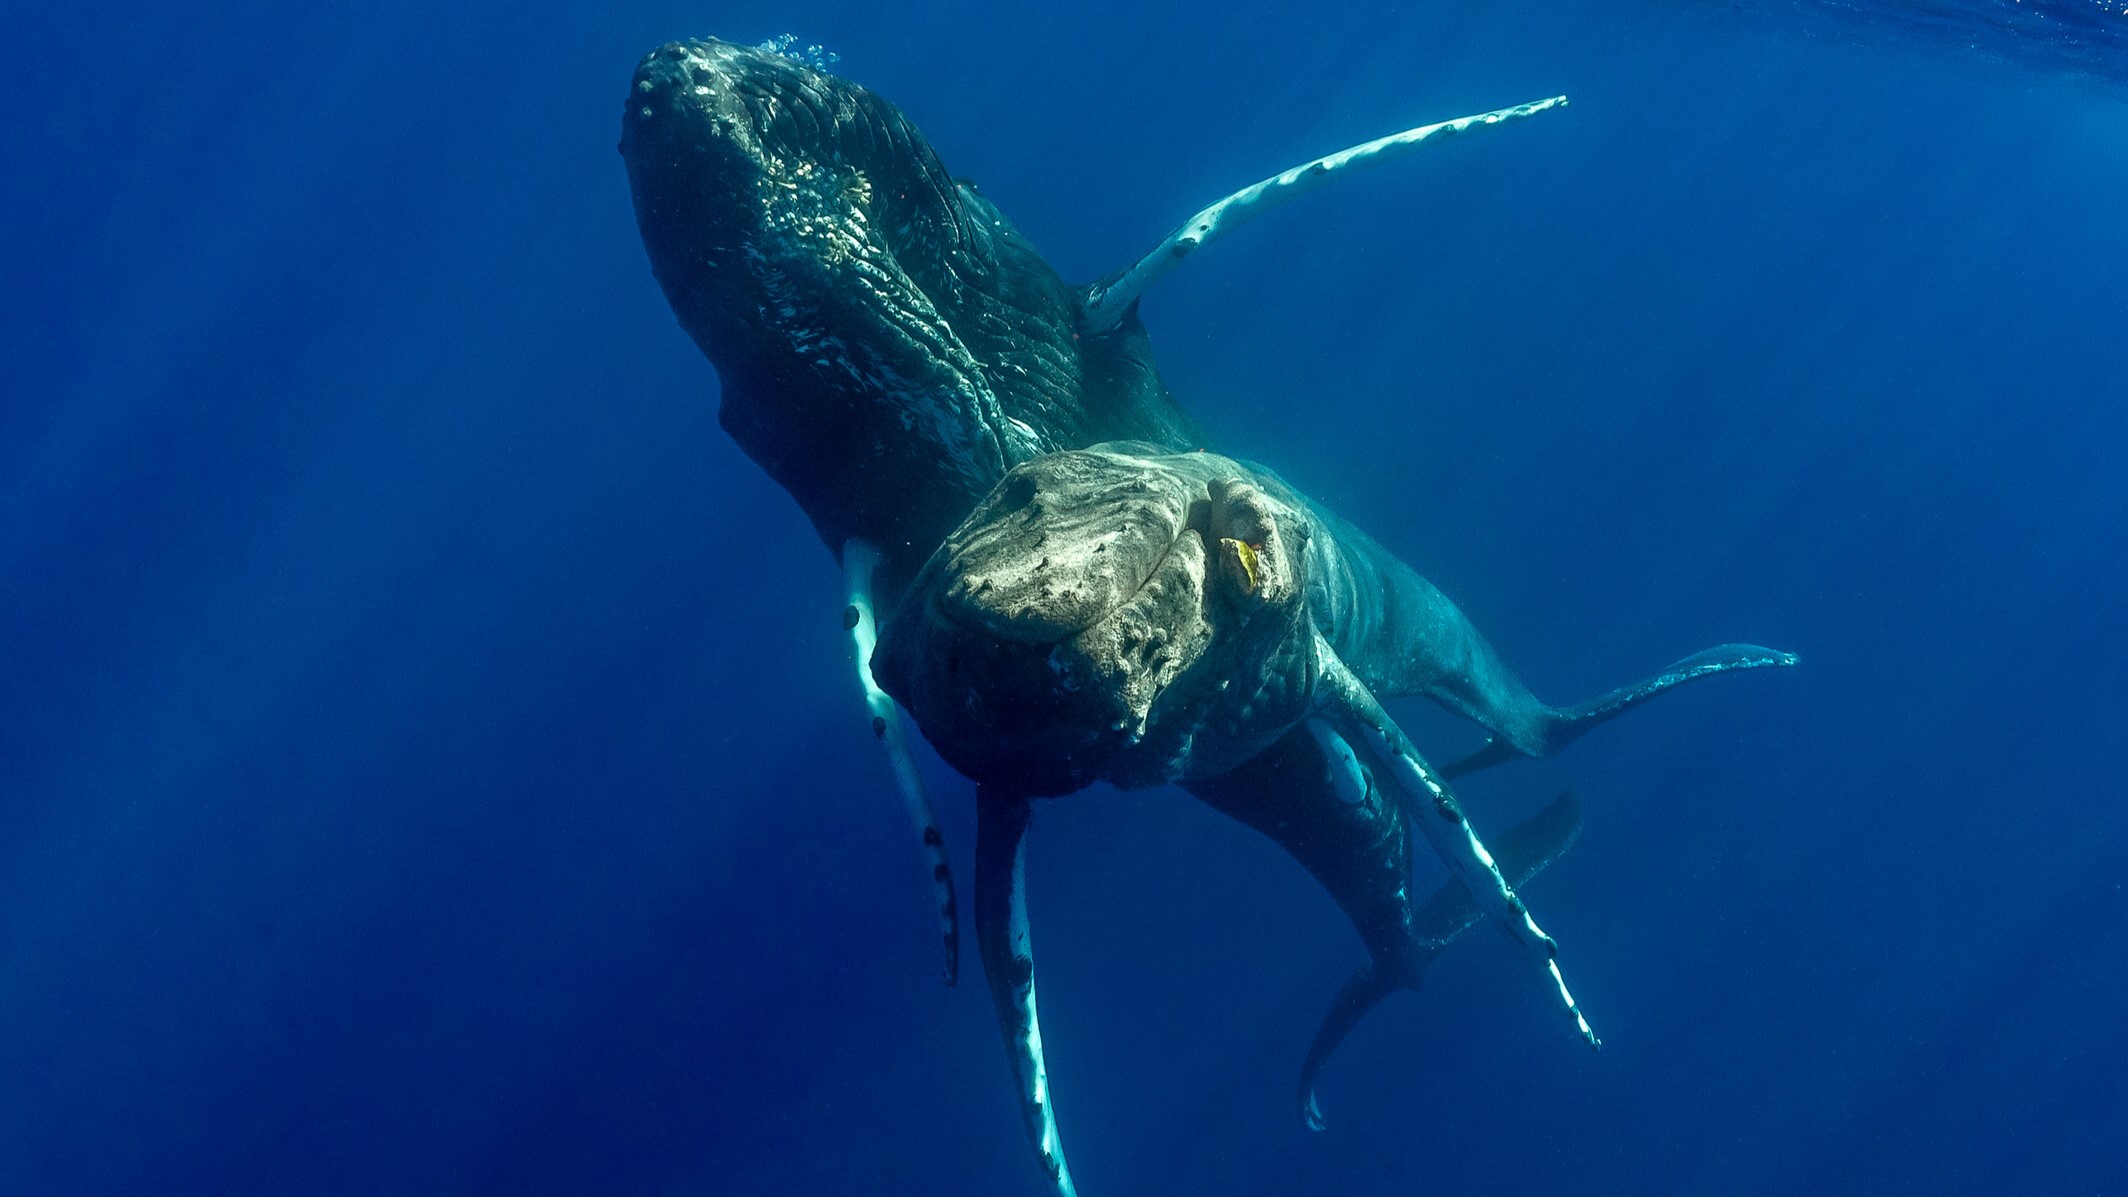 Two male humpback whales engaging in sexual behavior beneath the water surface.